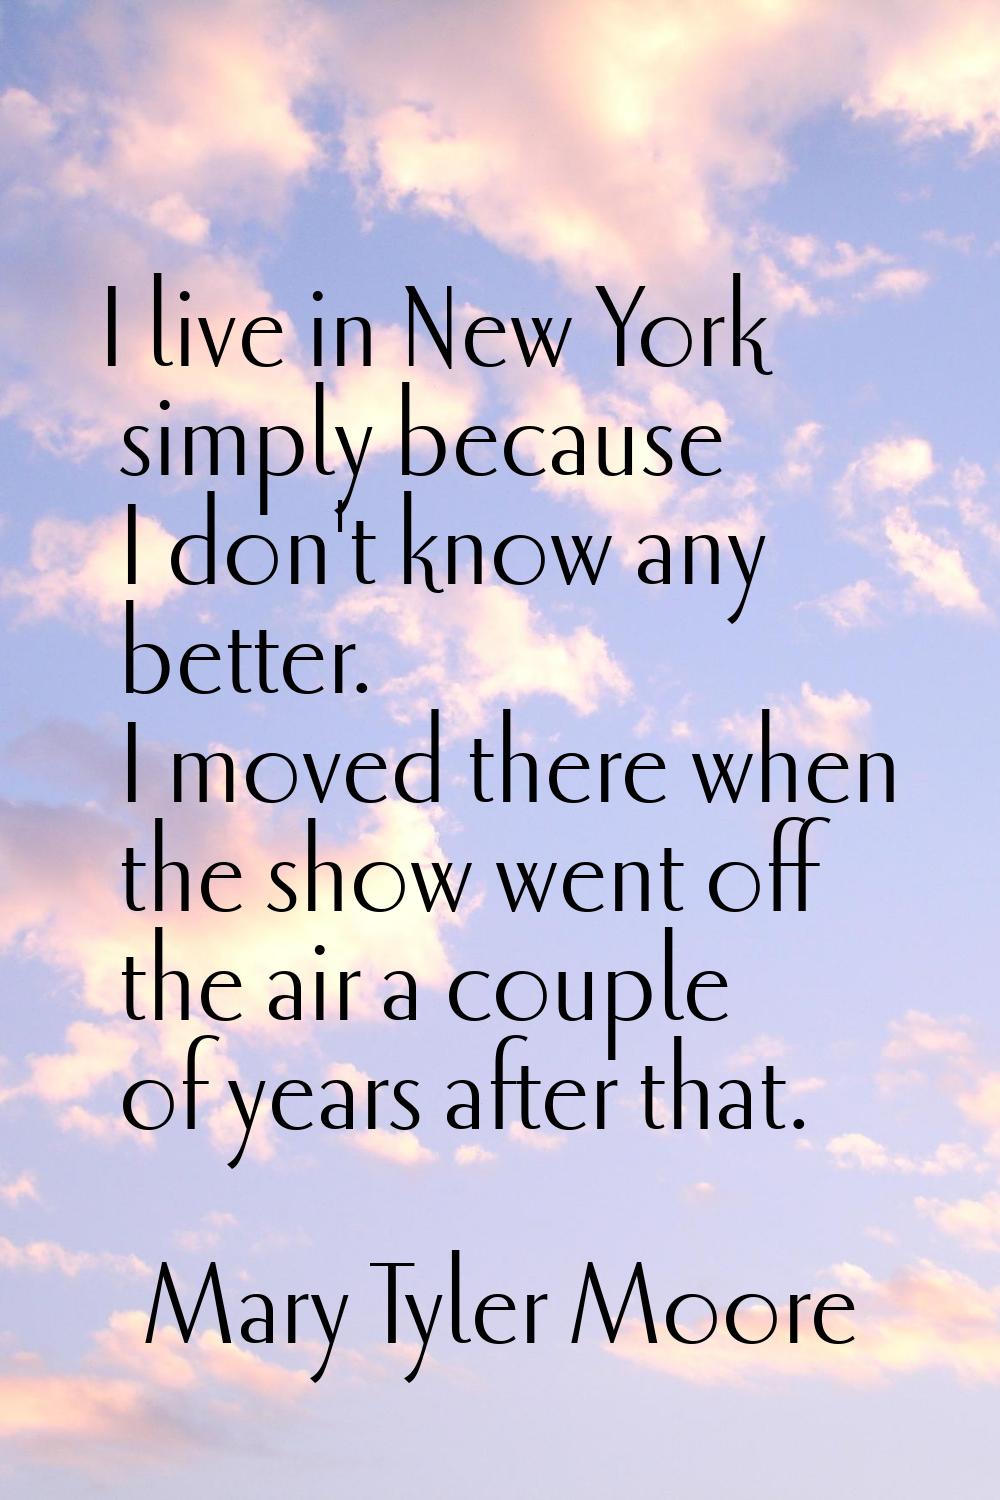 I live in New York simply because I don't know any better. I moved there when the show went off the